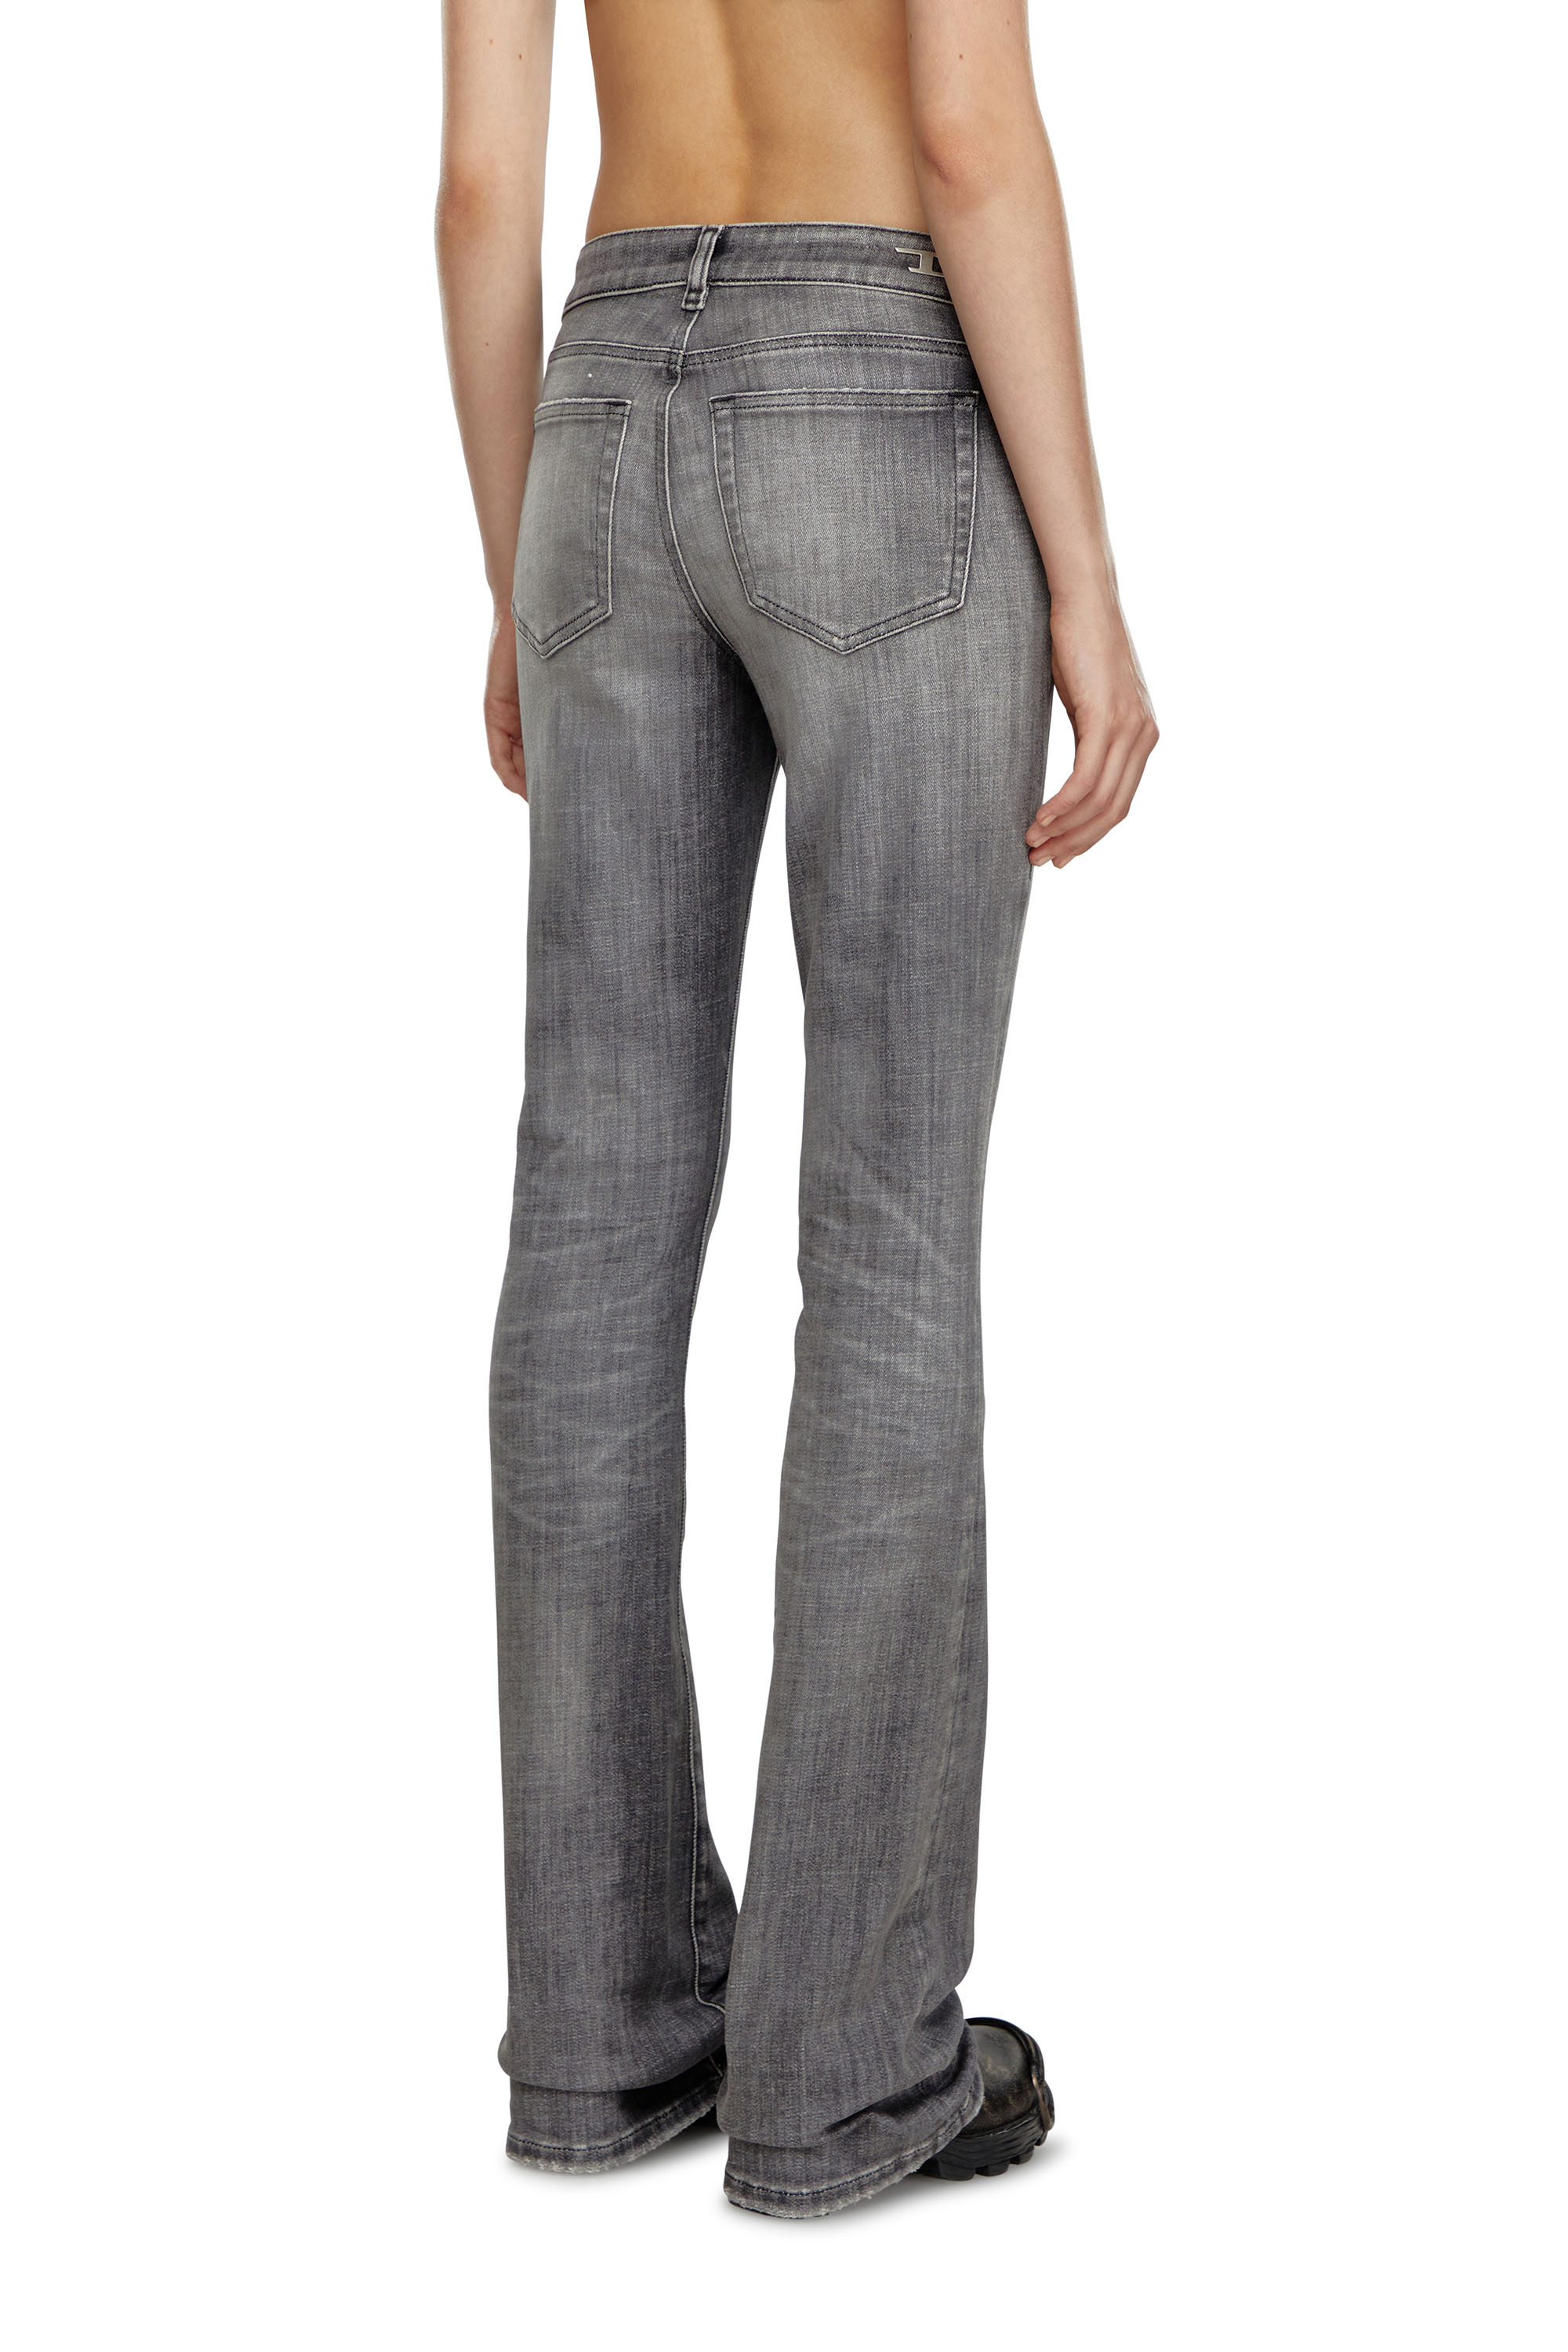 Diesel - Bootcut and Flare Jeans 1969 D-Ebbey 09J29, Mujer Bootcut y Flare Jeans - 1969 D-Ebbey in Gris - Image 4